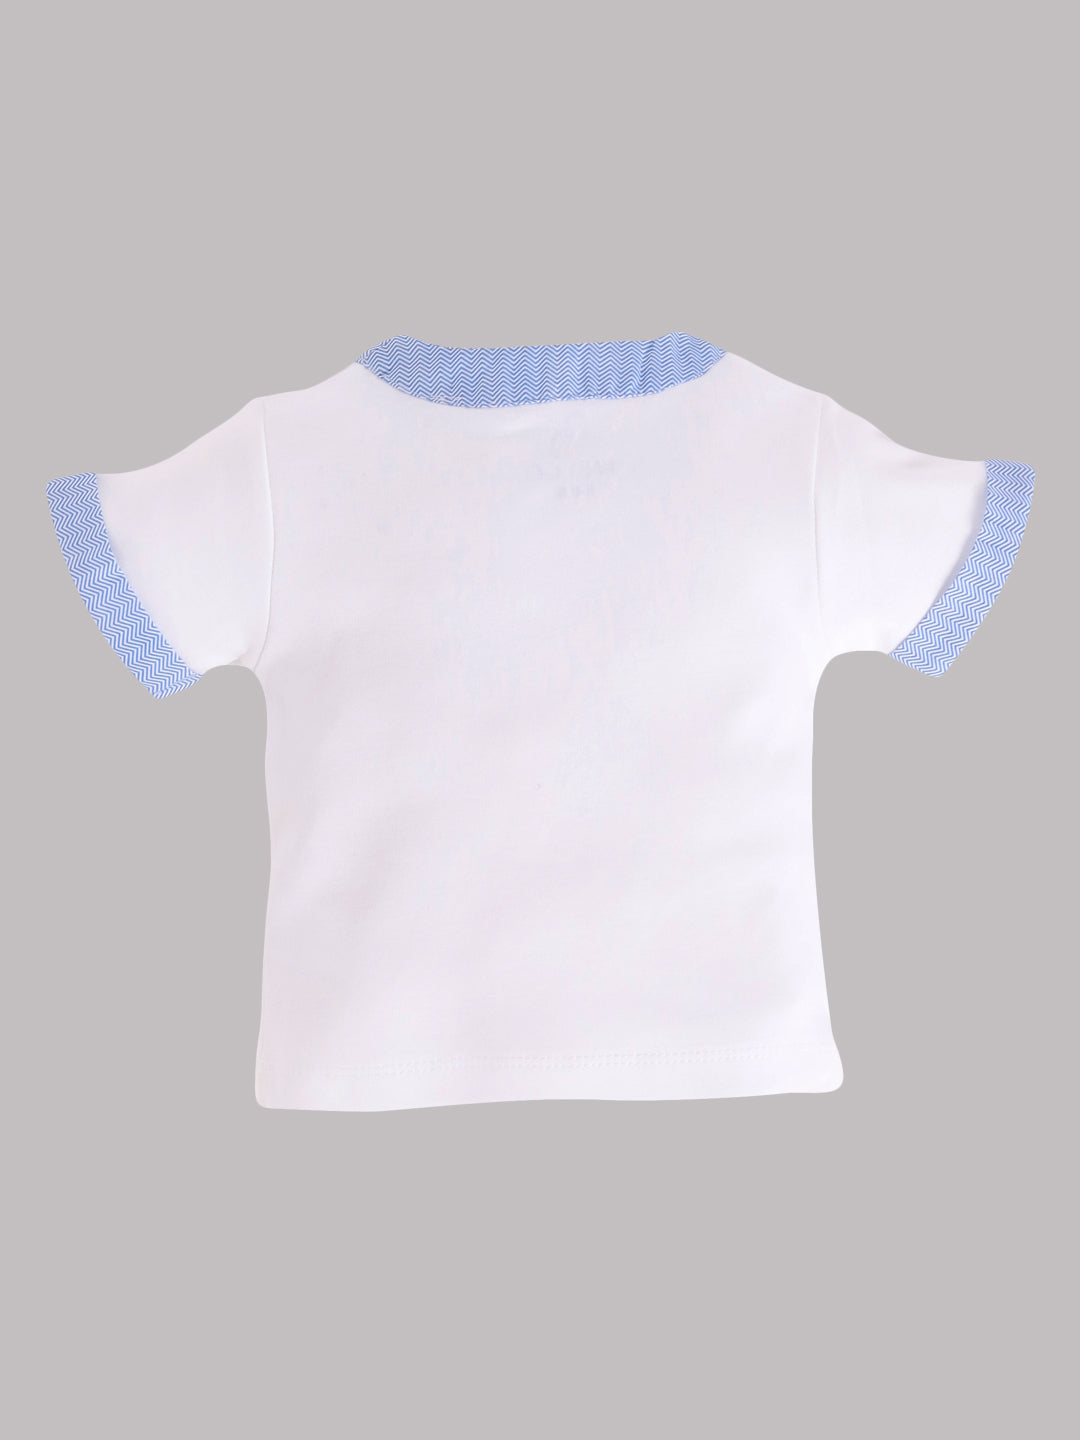 Half T-shirt and Shorts Set for Baby Boys 100% pure cotton-SKY